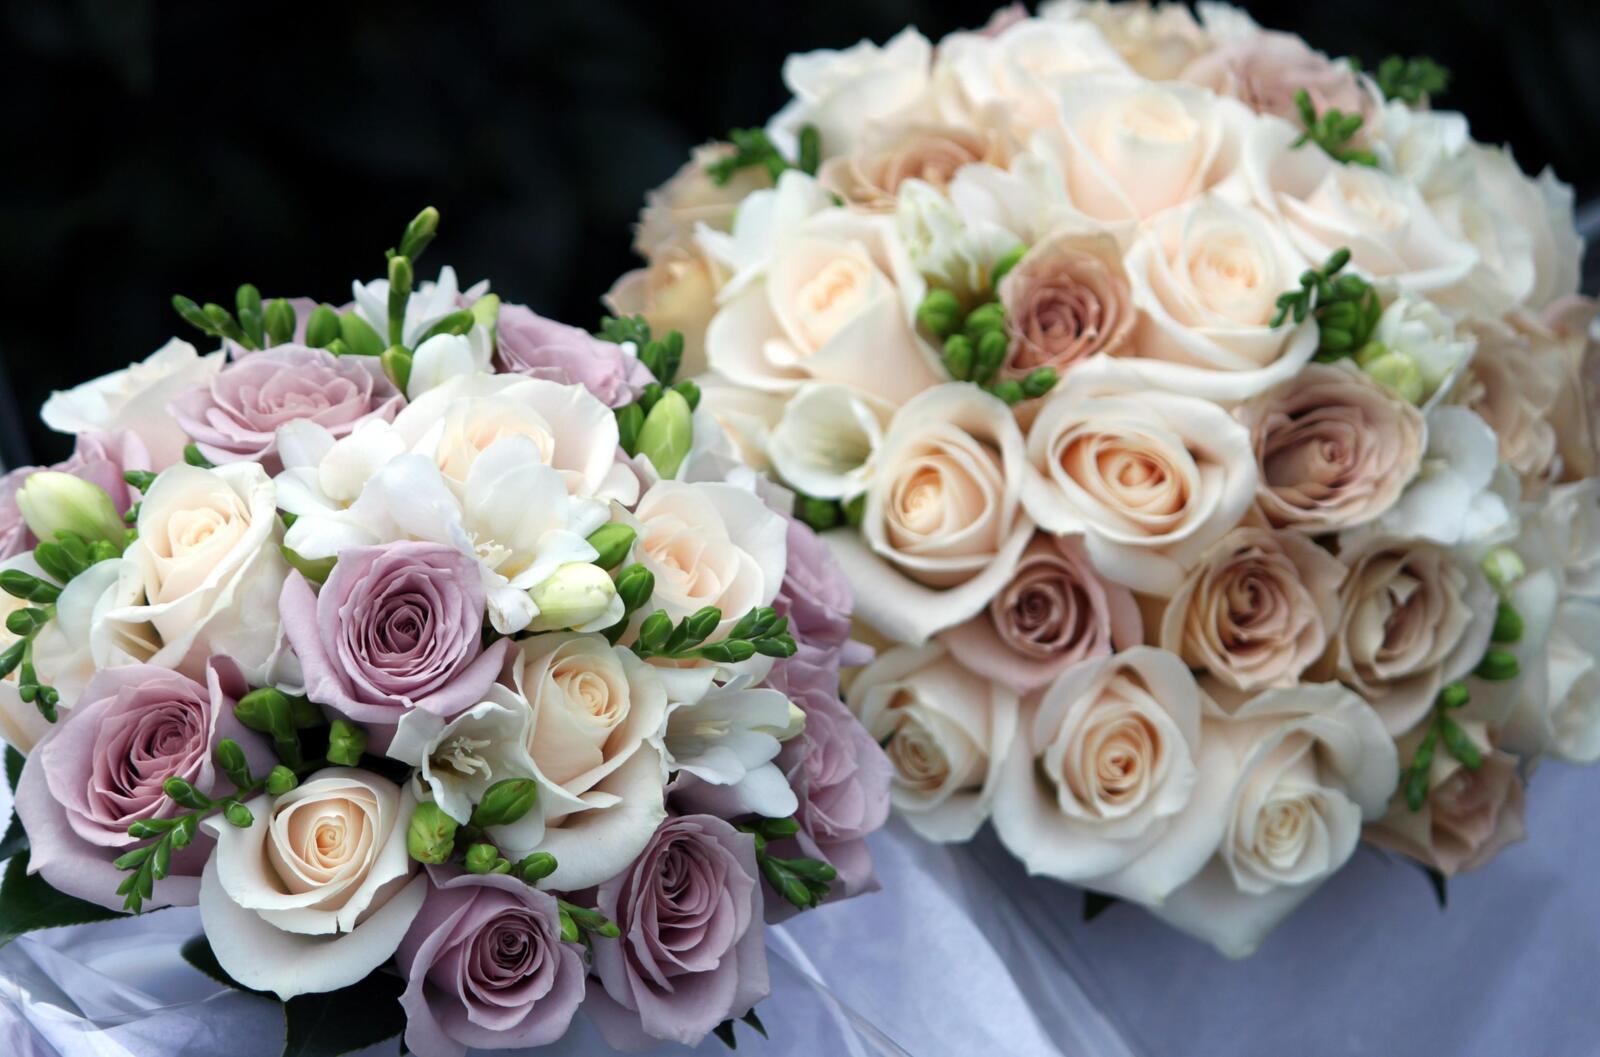 Free photo Two wedding bouquets of roses